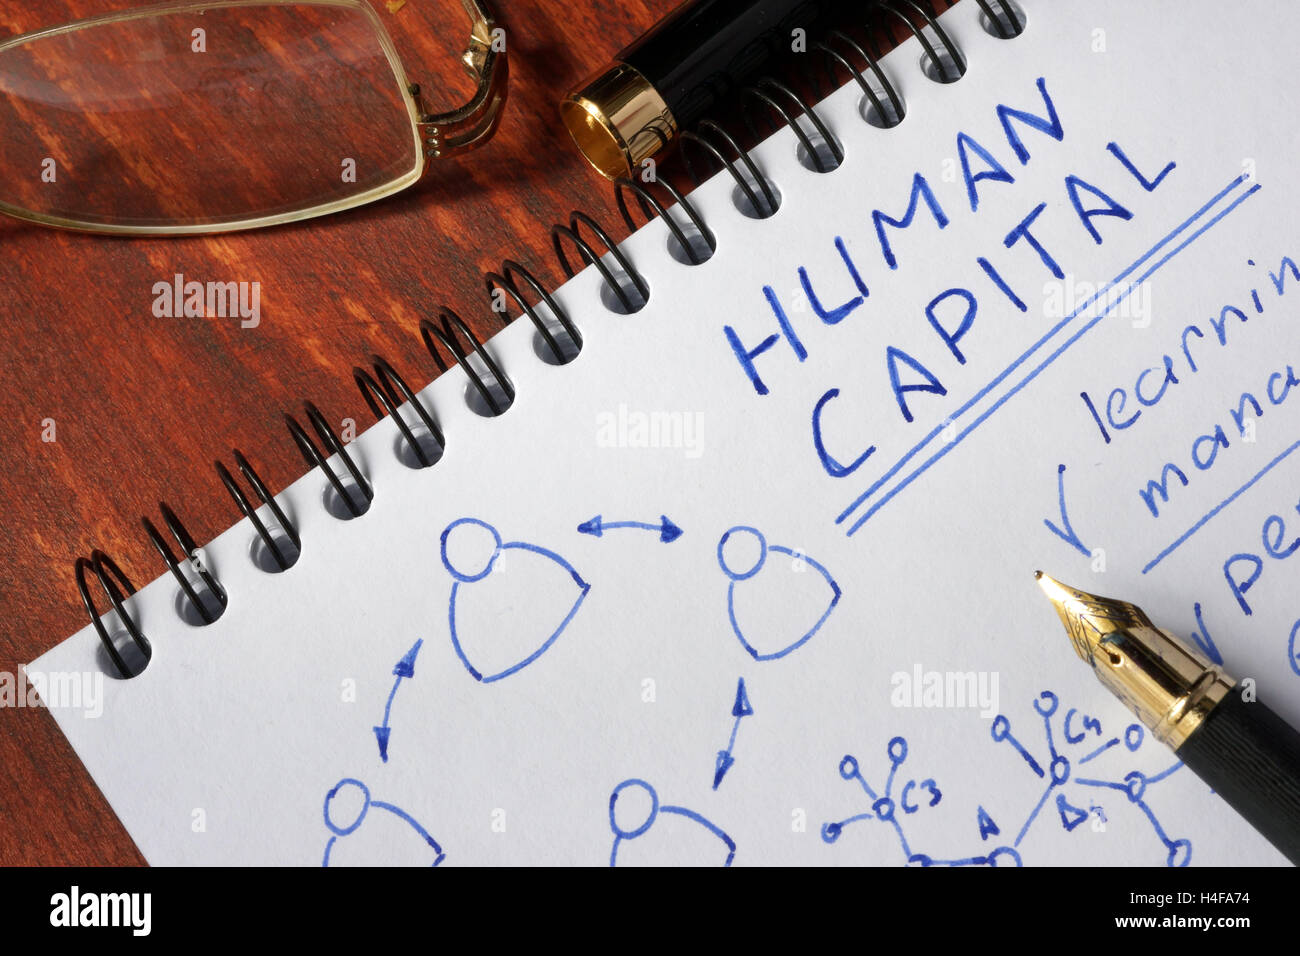 Notepad with Human Capital on a wooden surface. Stock Photo